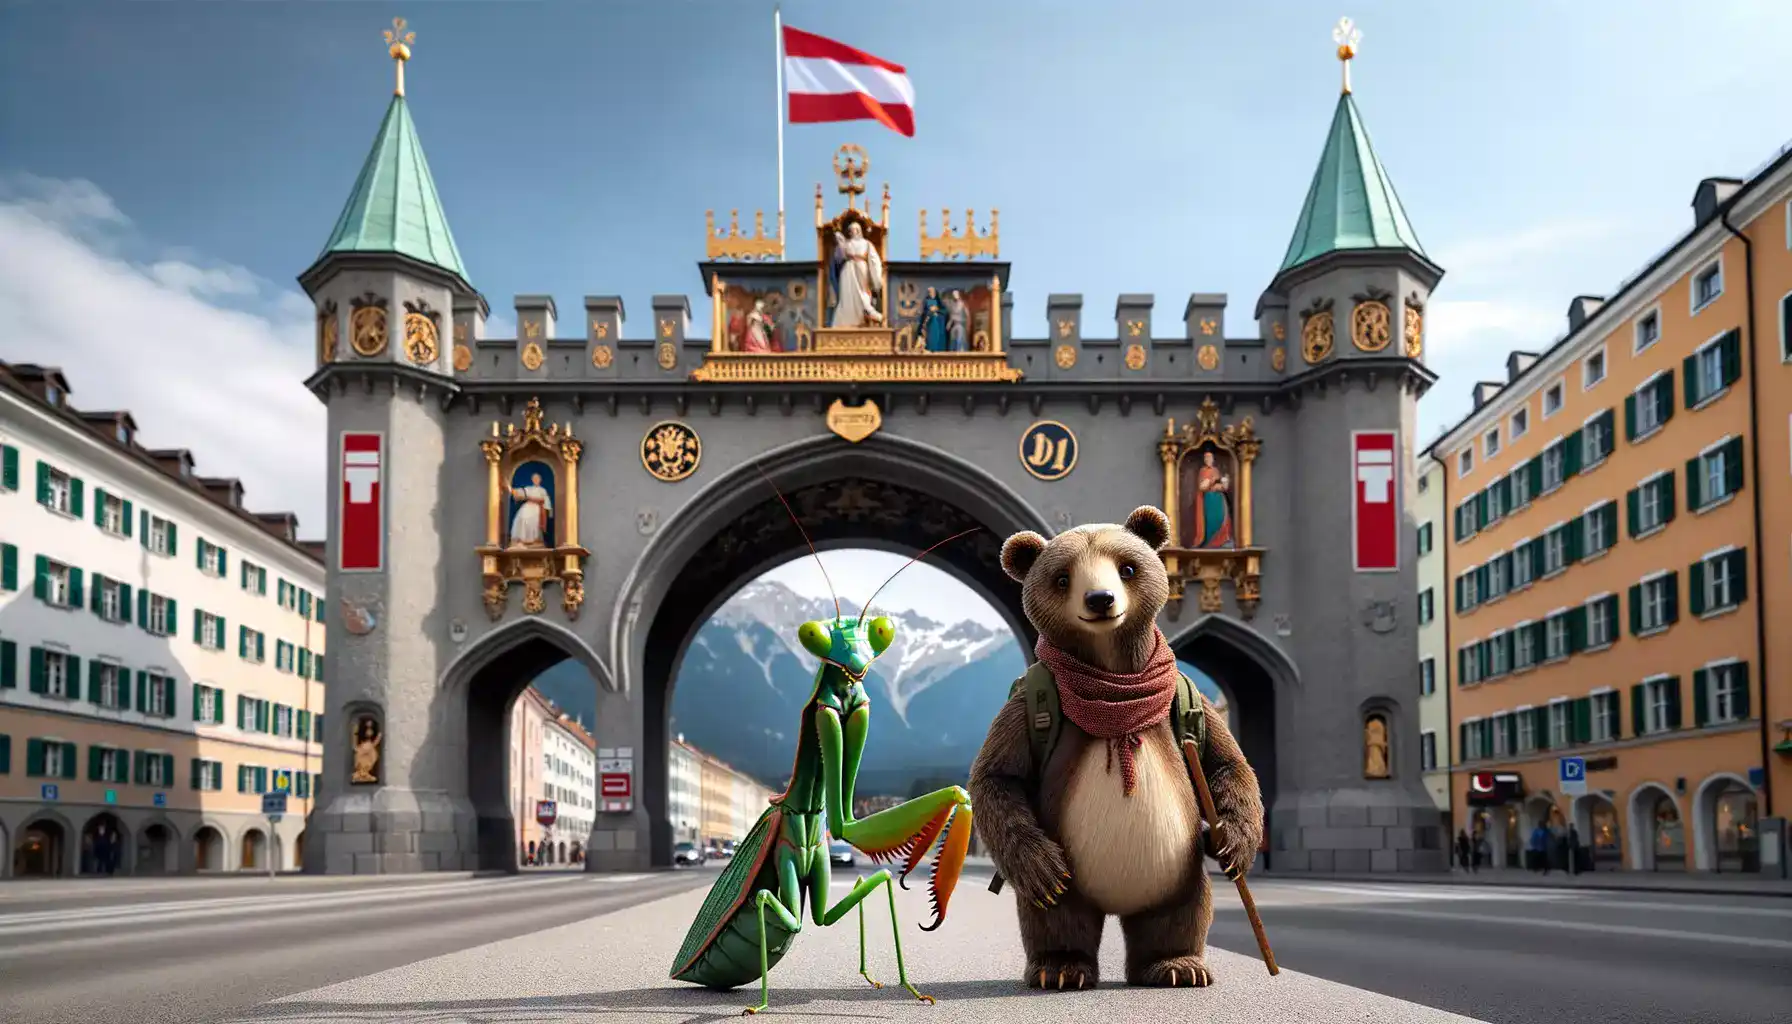 Bruno and Maya arrive at the city gates of Innsbruck, Austria